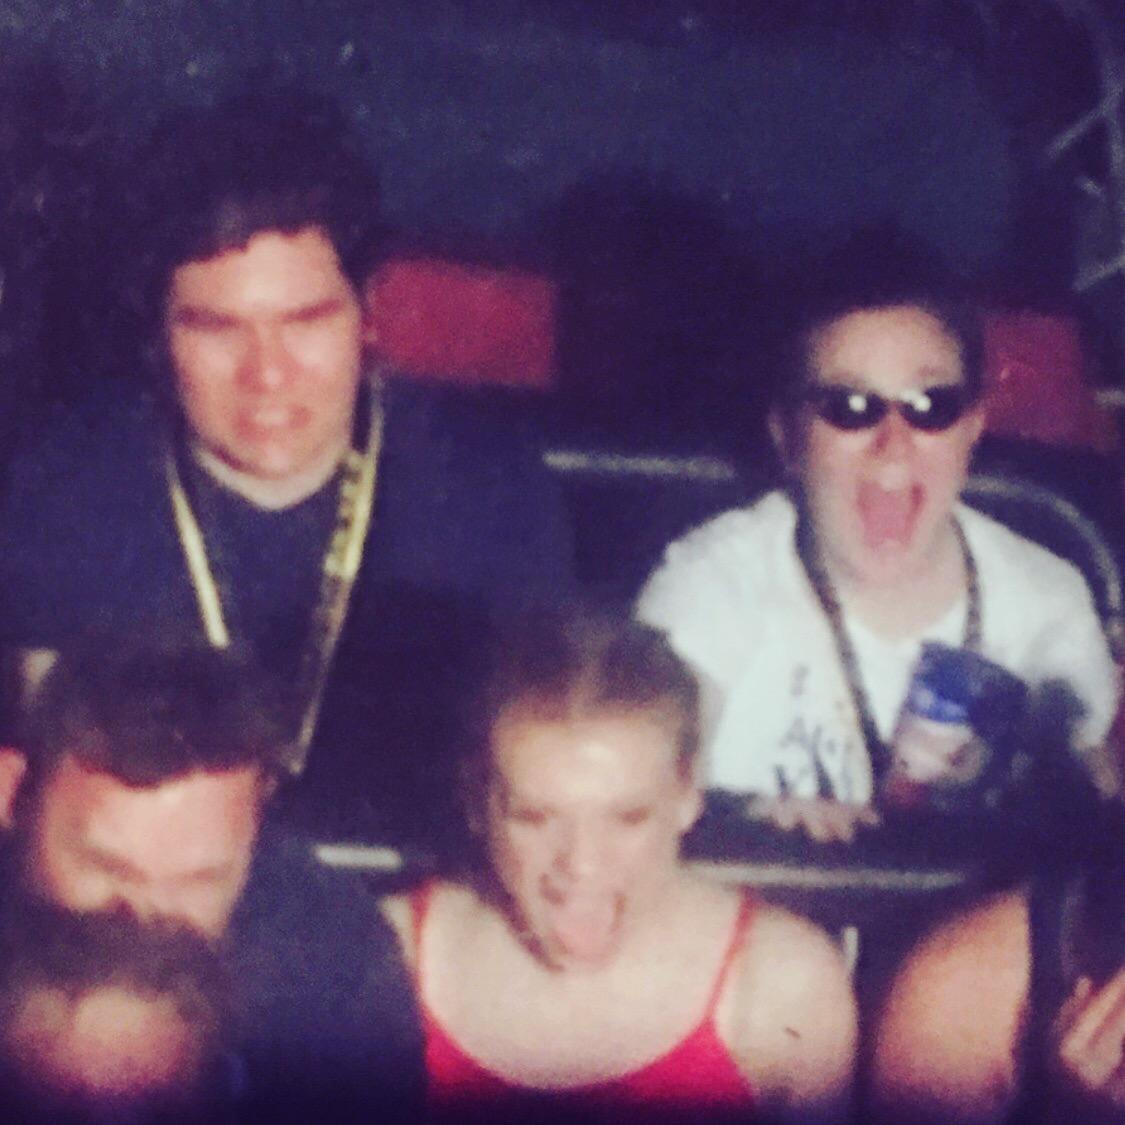 They went with Austin's family to six flags in 2017, but Austin isn't as much a fan of rollar coasters as Joplyn is.